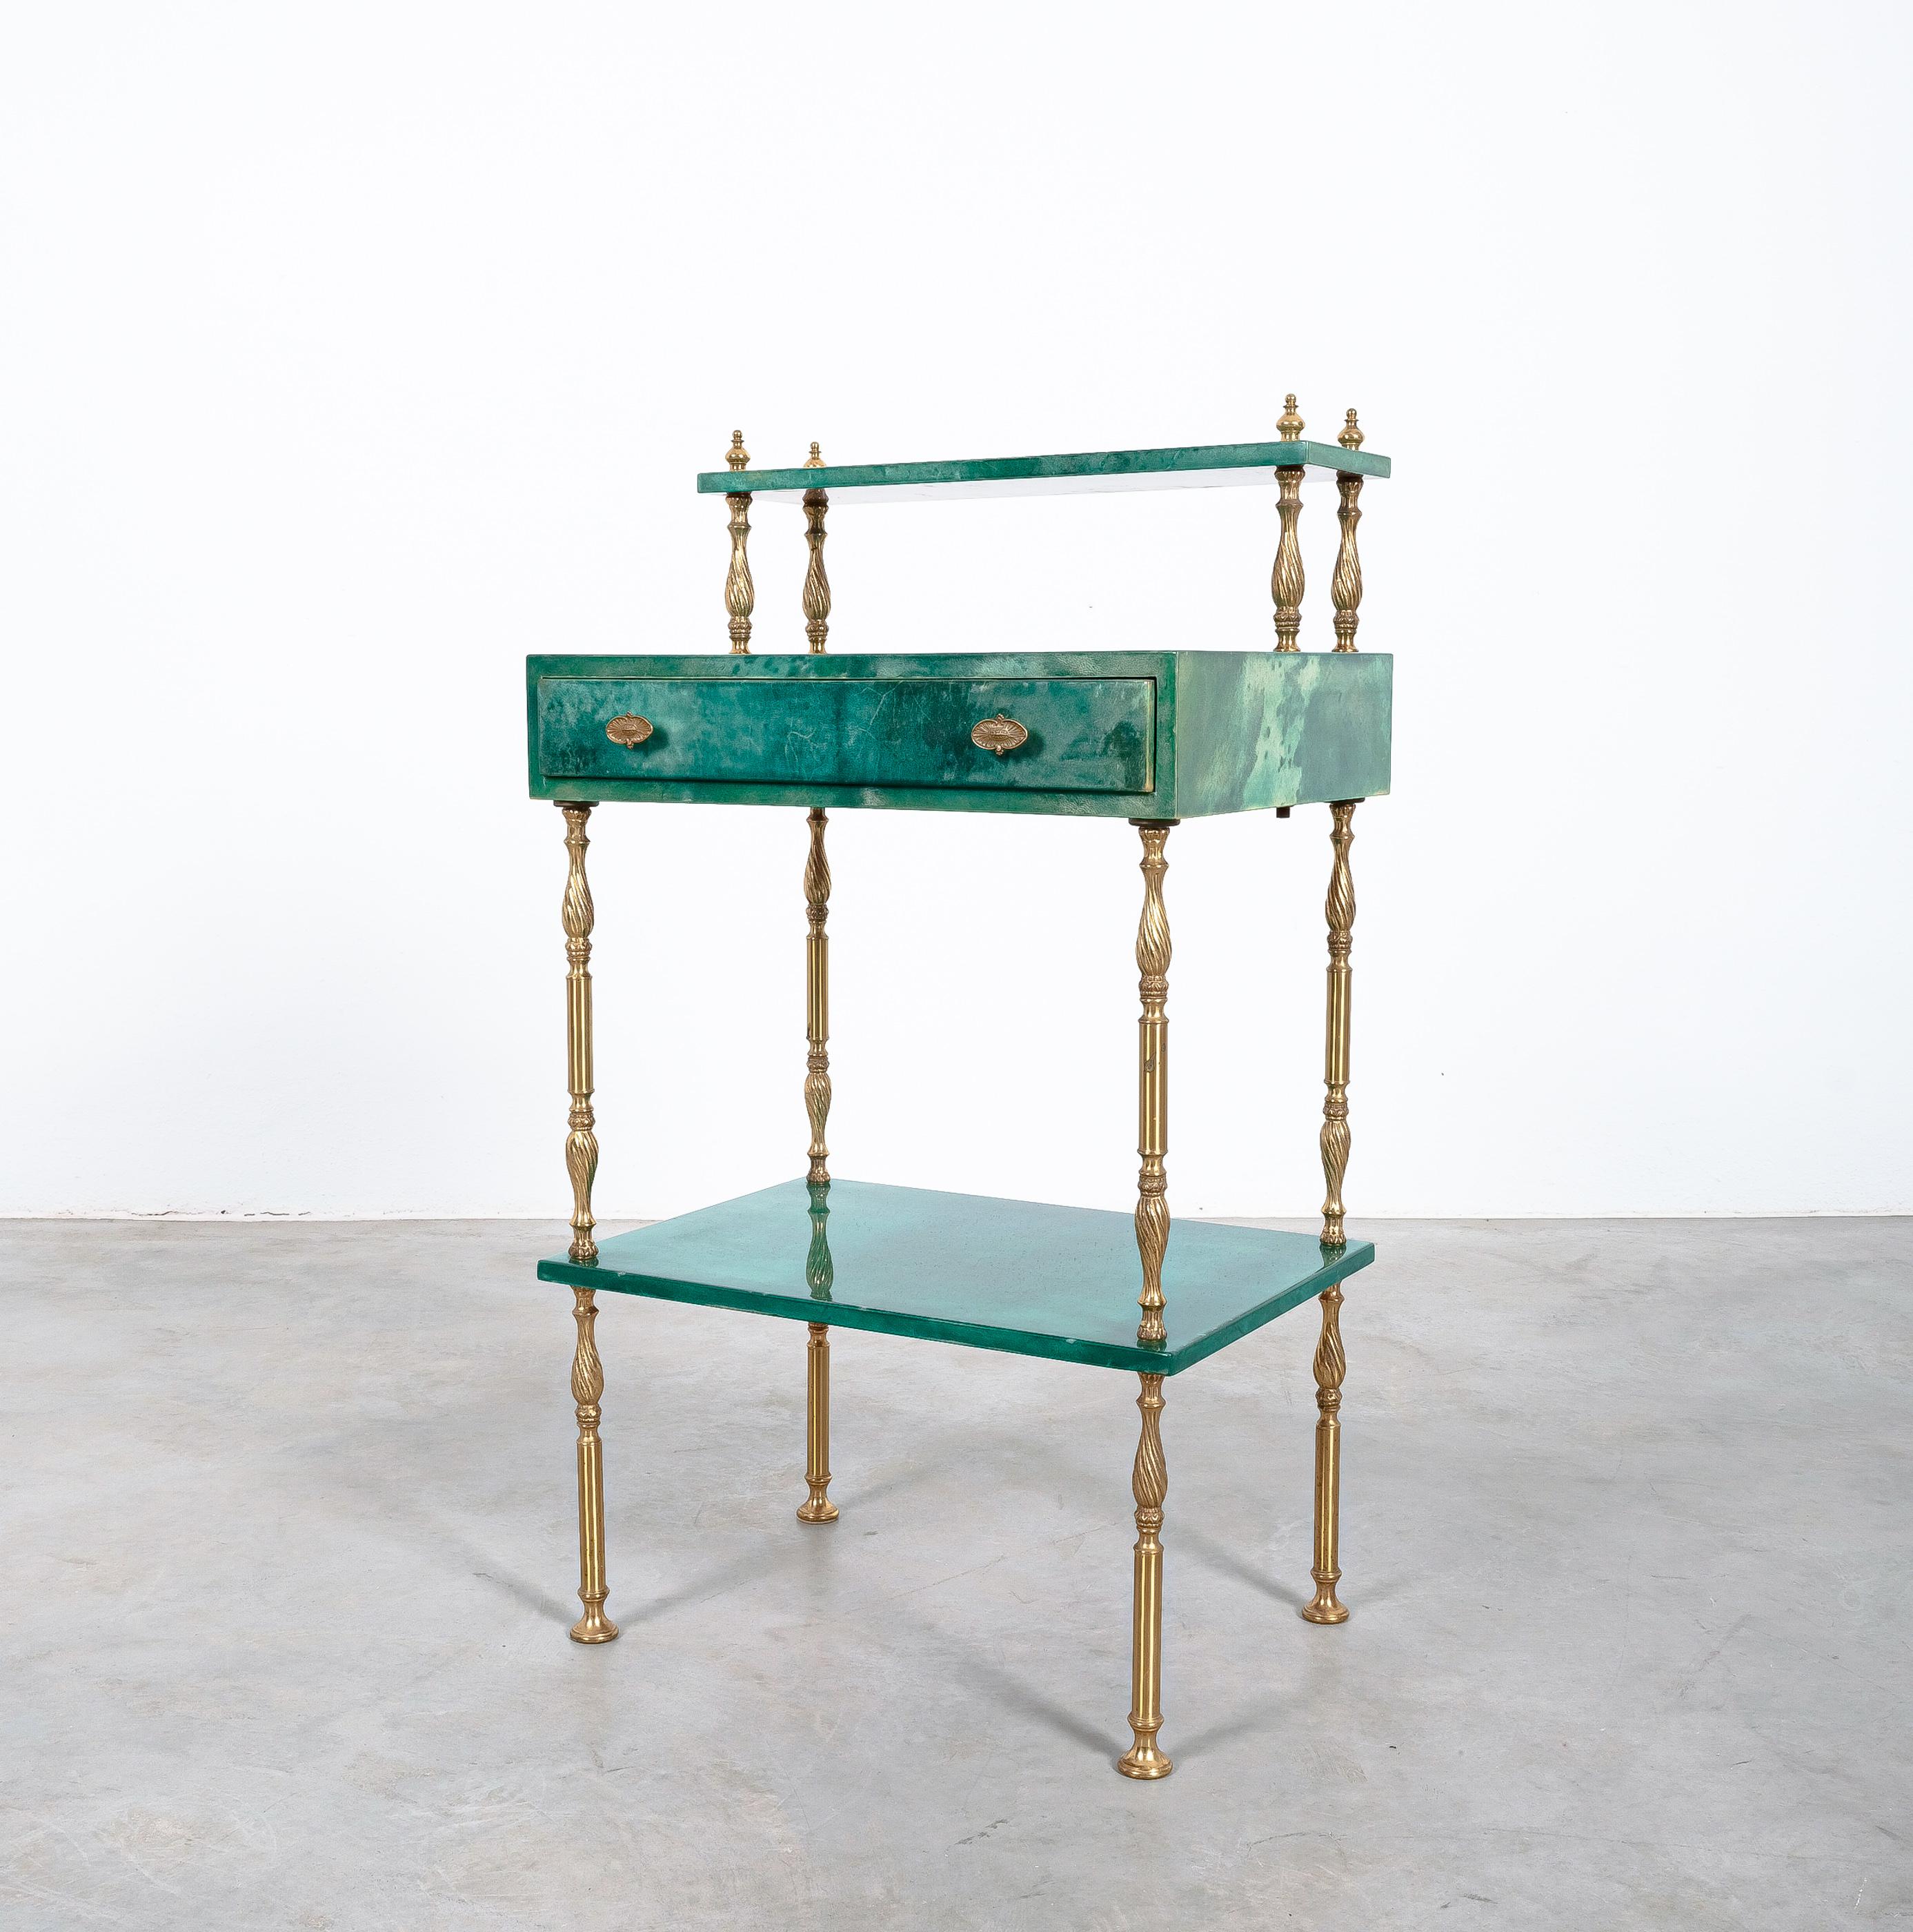 Original mid-century Aldo Tura side table with drawer, Milano 1960.

Beautifully preserved parchment side or bed table with accentuated corinthian brass / iron pillars. An elegant piece for a dresser room or as a side table with a single drawer. The